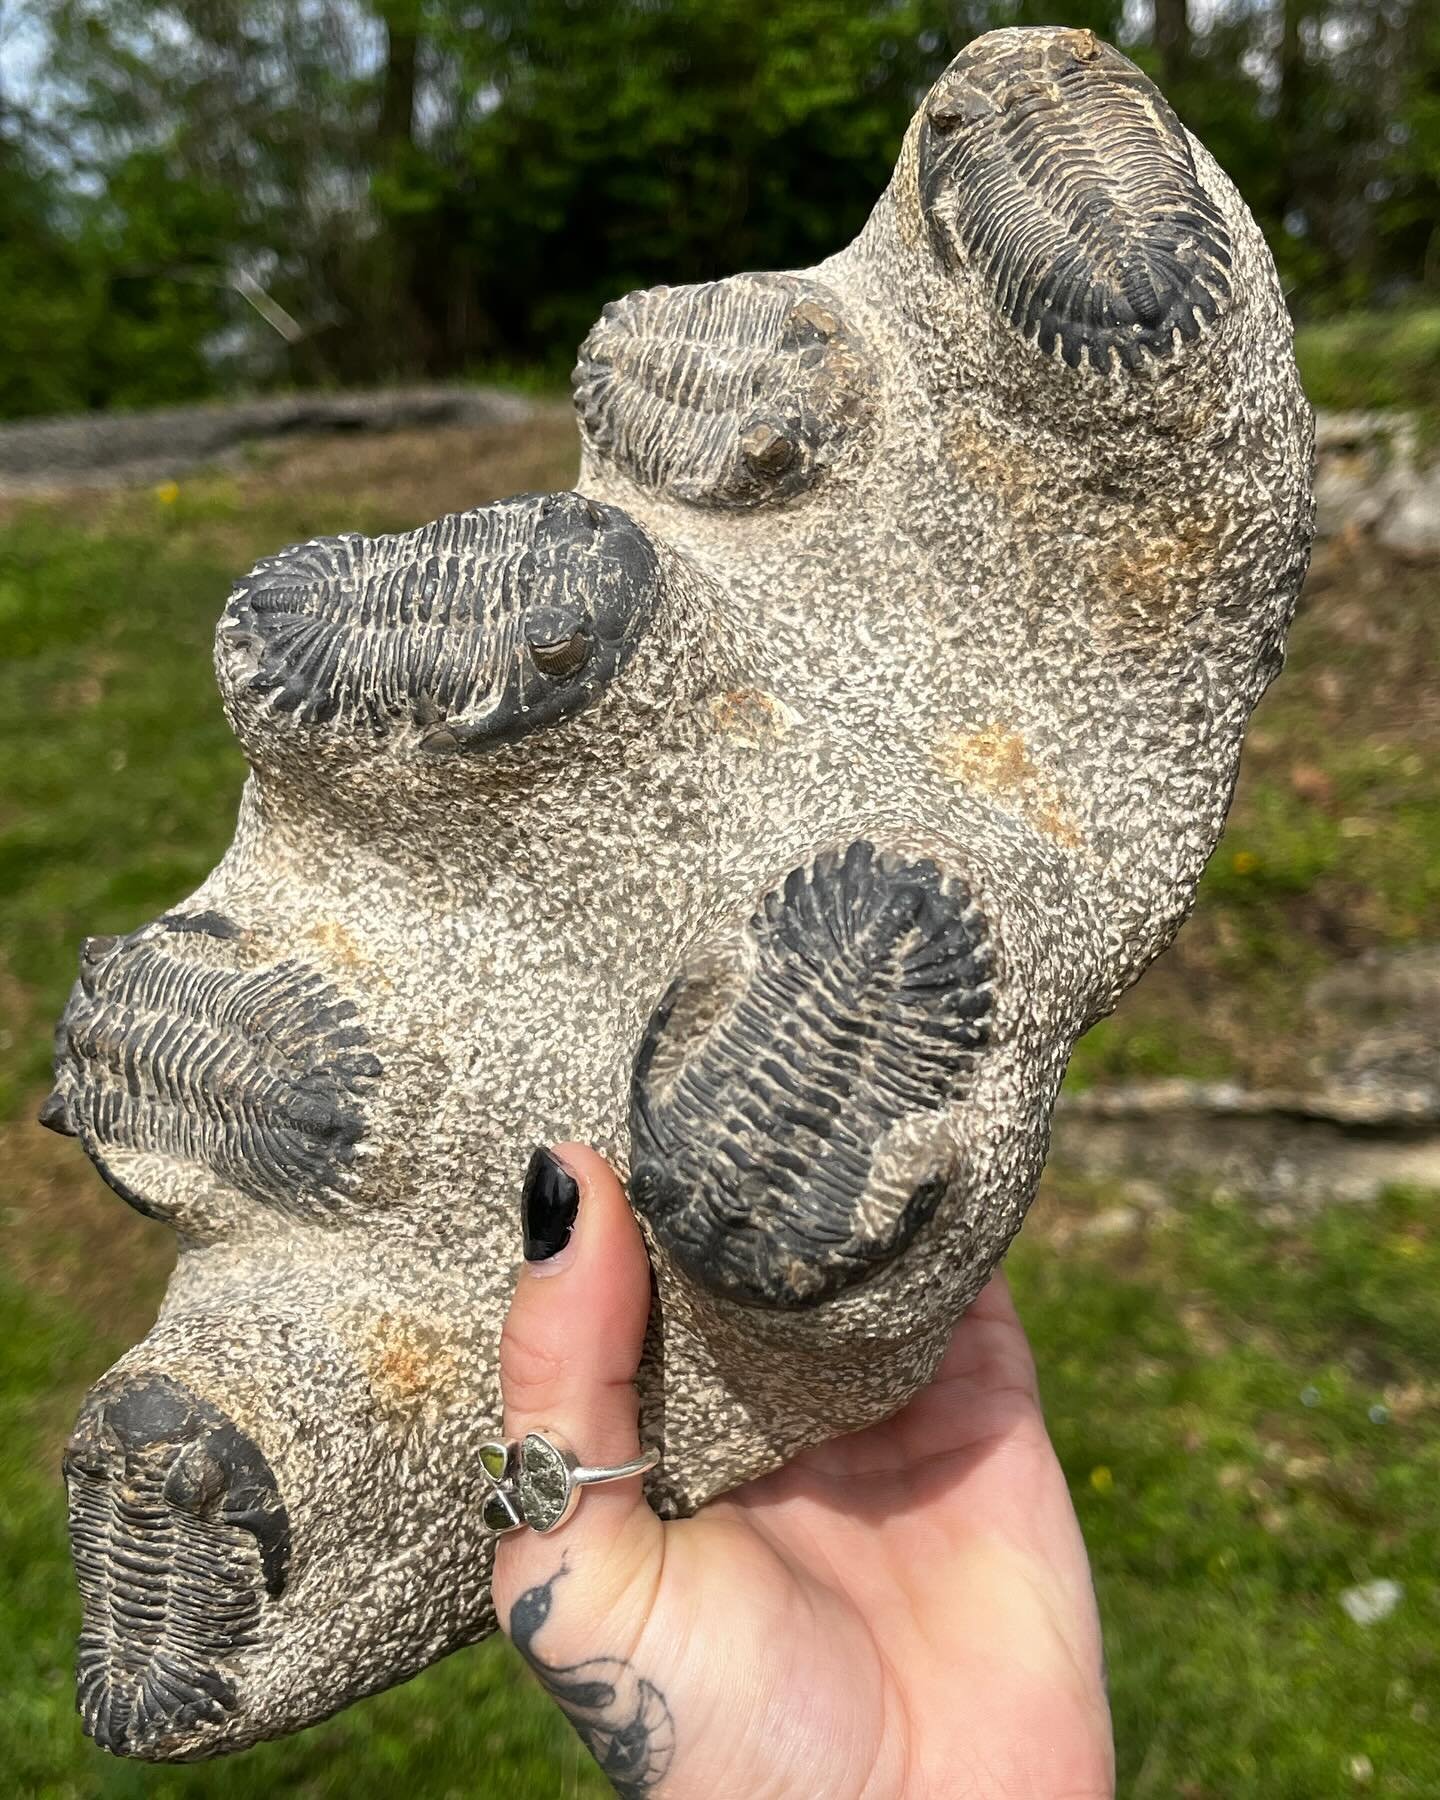 Trilobite cluster anyone?